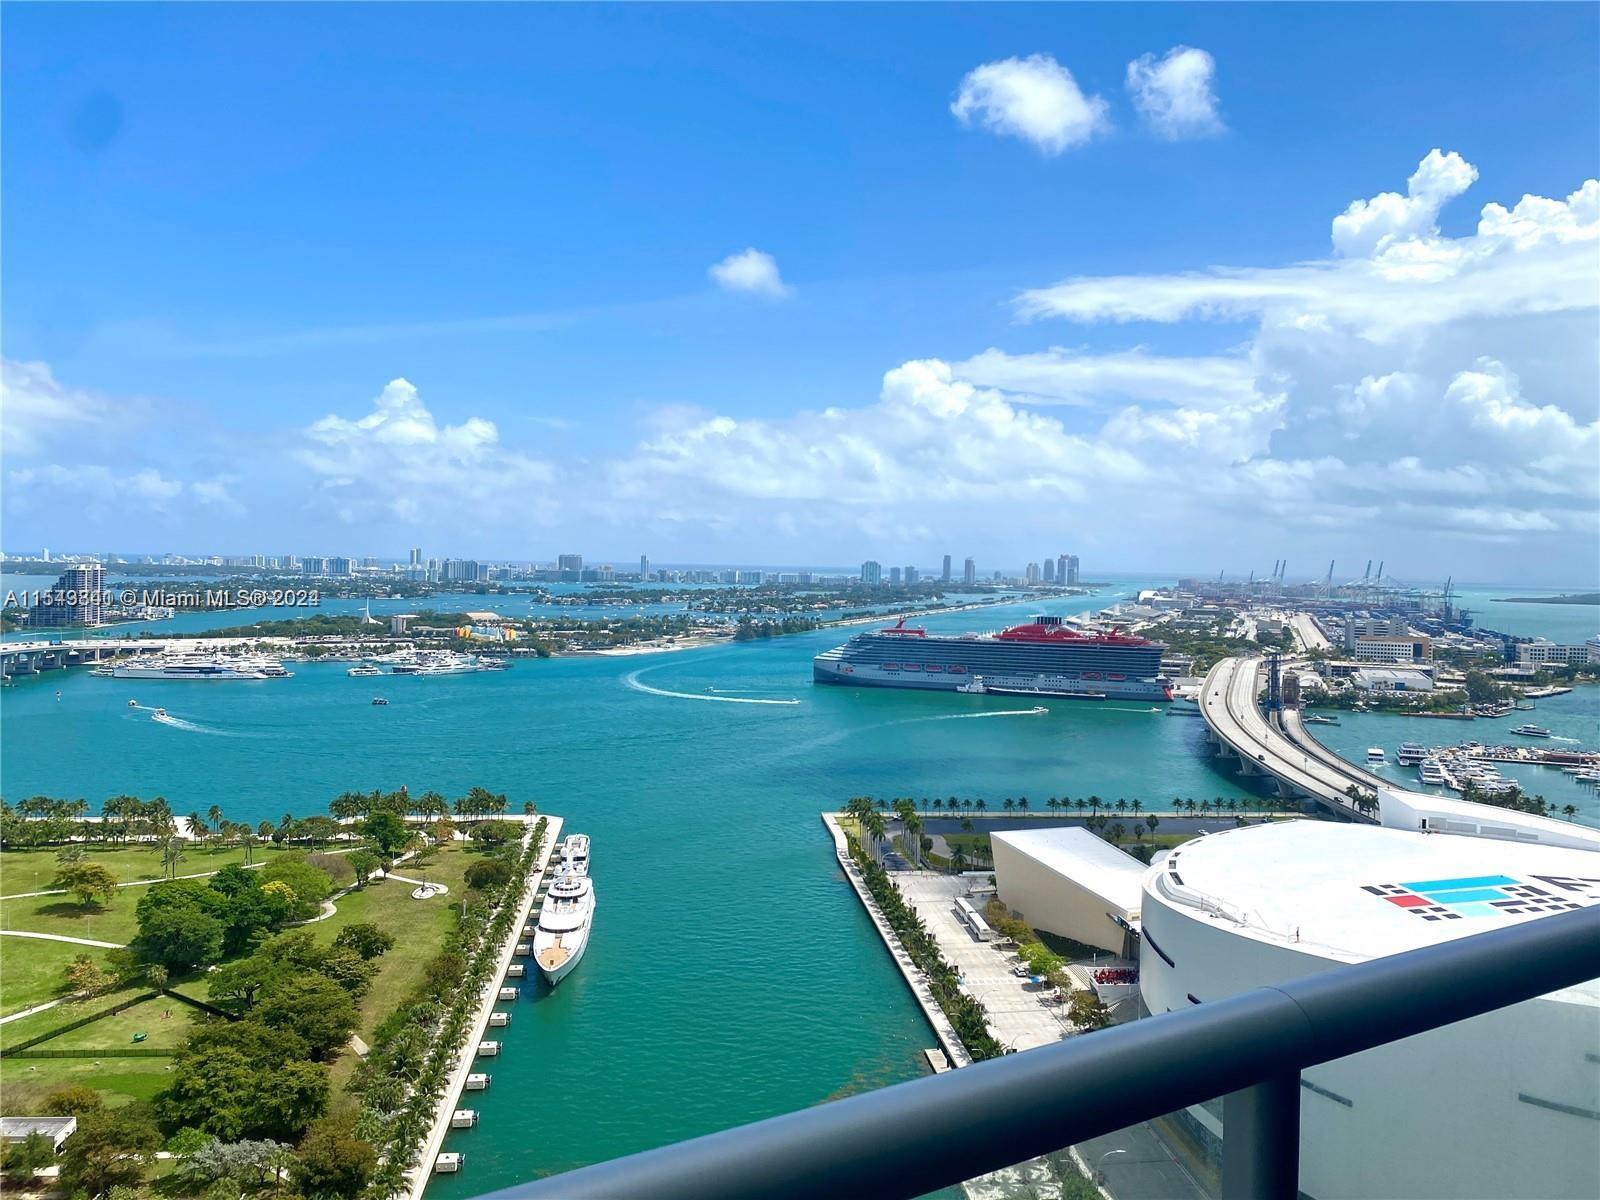 Beautiful 1/1.5 condo with panoramic views of Biscayne Bay available for a 1-year Lease starting March 15 at Marina Blue just minutes from Sobe, Brickell, Design District. This unit is being offered unfurnished and features floor-to-ceiling windows, an open kitchen with stainless steel appliances and  granite countertops, an oversized balcony, a large walk-in closet, and a new washer/dryer in the unit. The building’s resort style amenity deck includes sunset & sunrise pools, jacuzzi, beach volleyball, mini golf, Bayfront fitness center, and BBQ area. Max 2 pets with combined weight of 45 lbs. Cable included in rent. Renters Insurance required